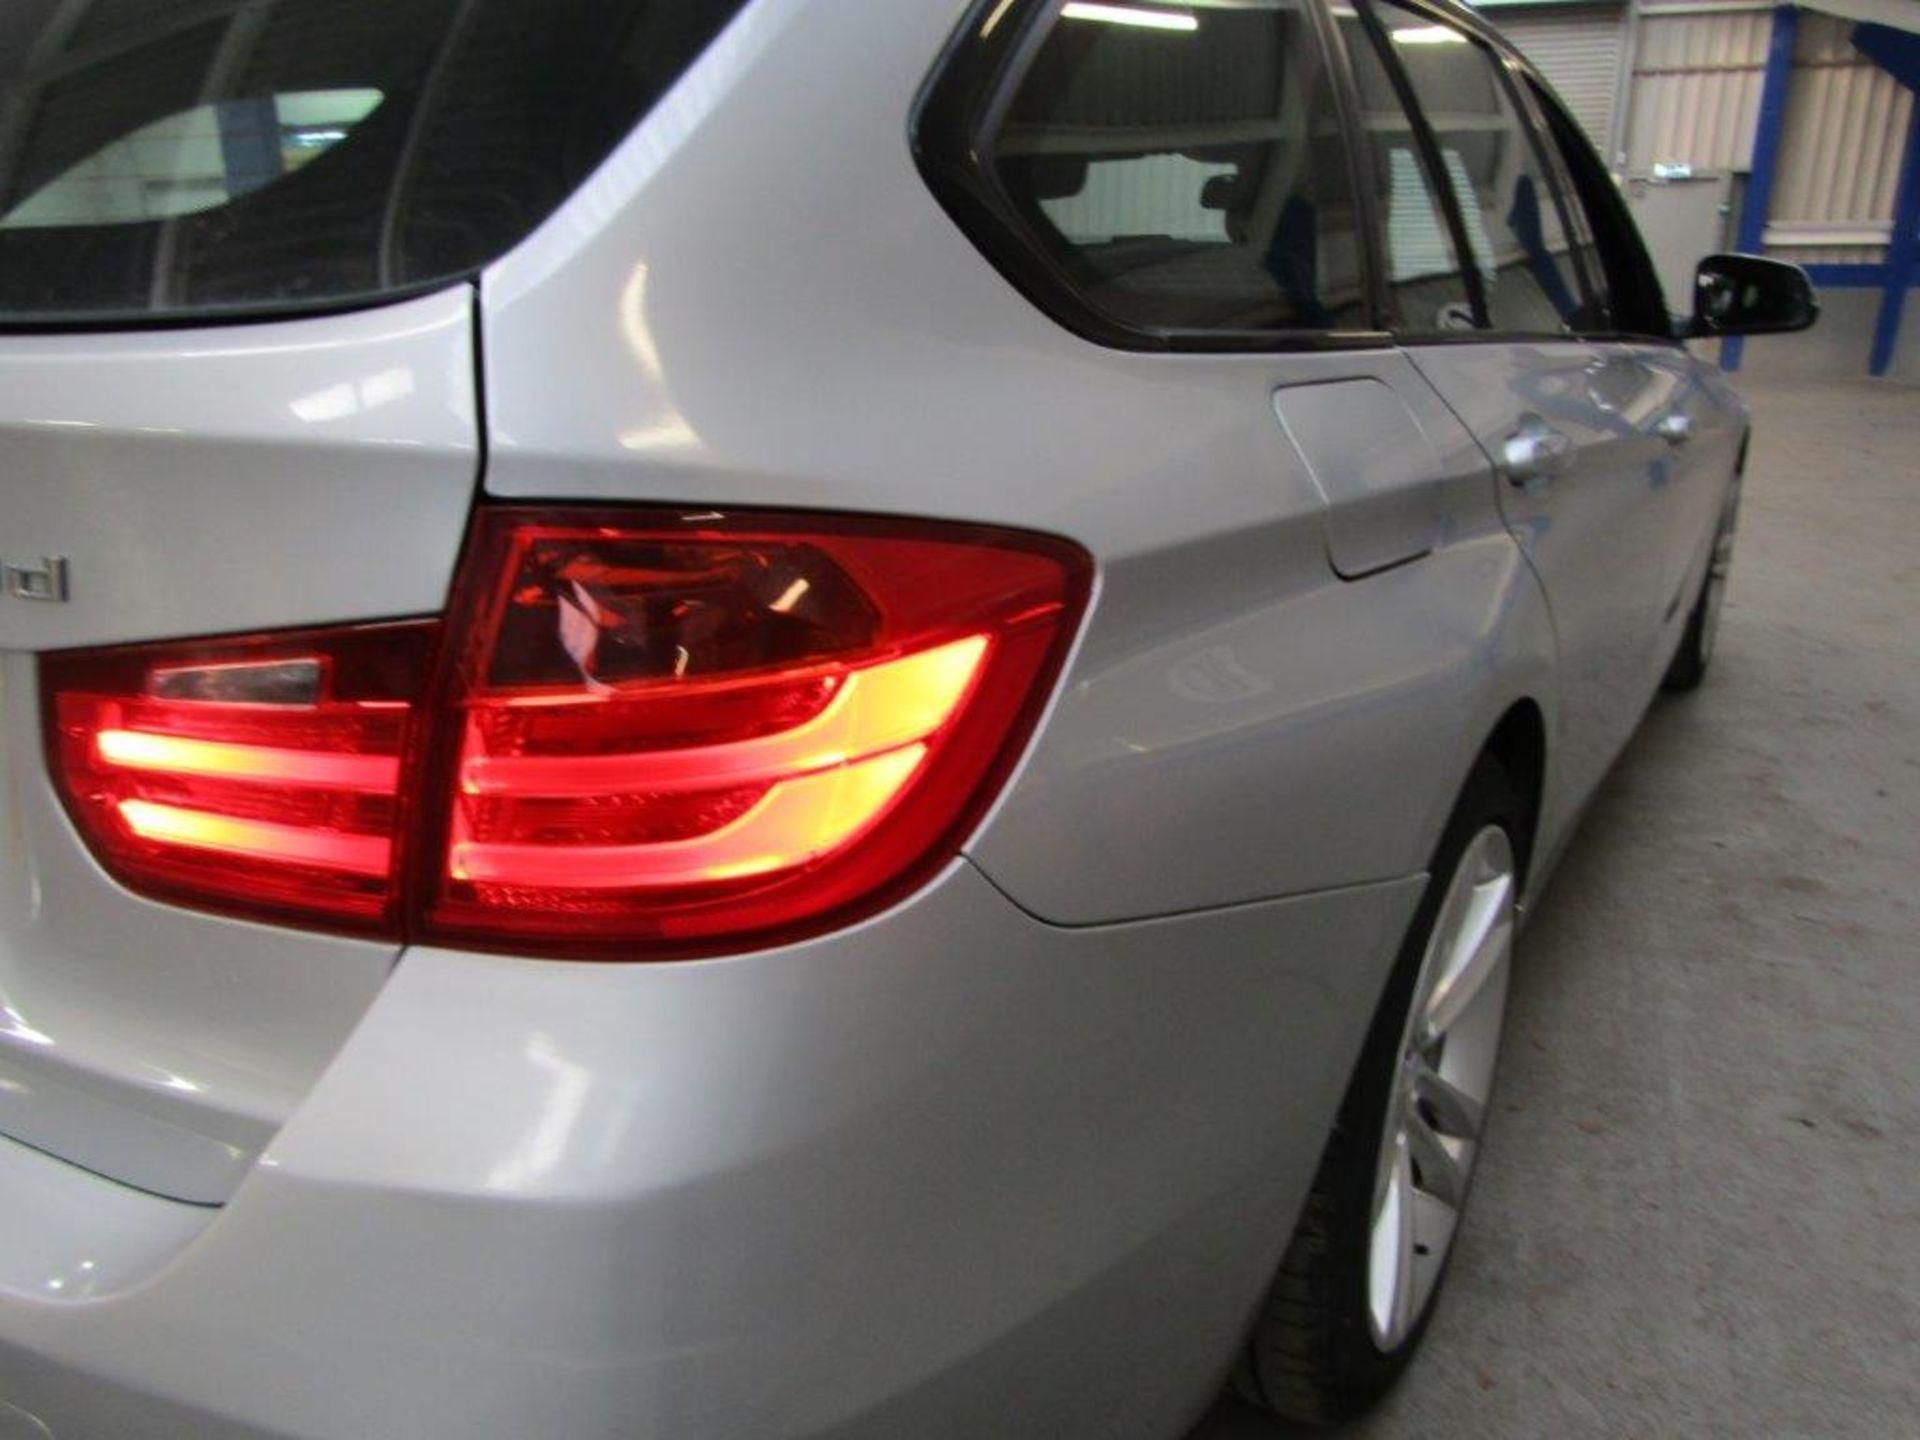 62 12 BMW 320D Sport Touring - Image 23 of 29